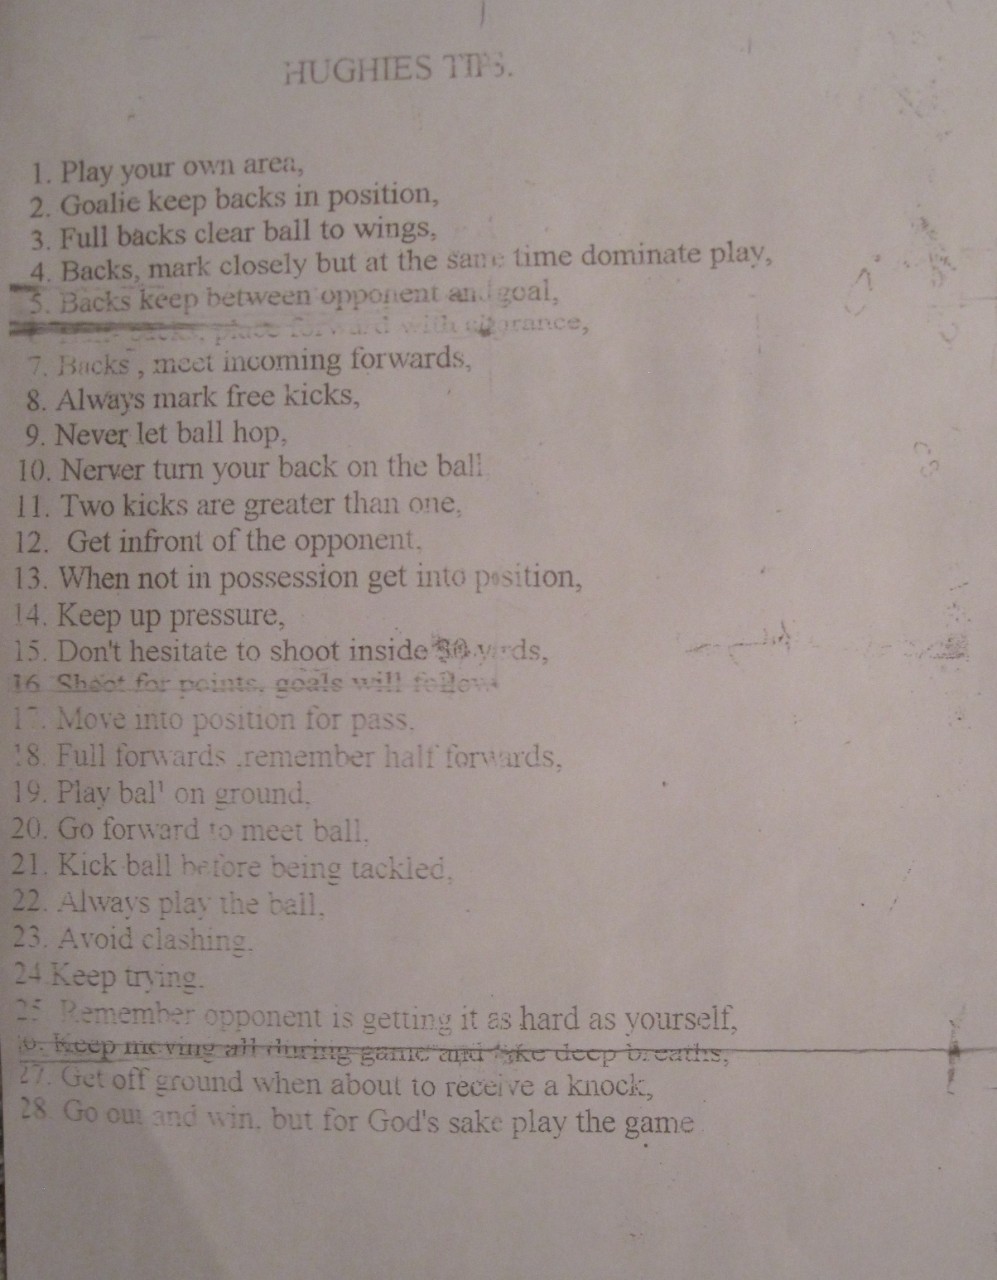 Training tips given by Cavan County Secretary Hugie Smith to players at a training session in 1952.